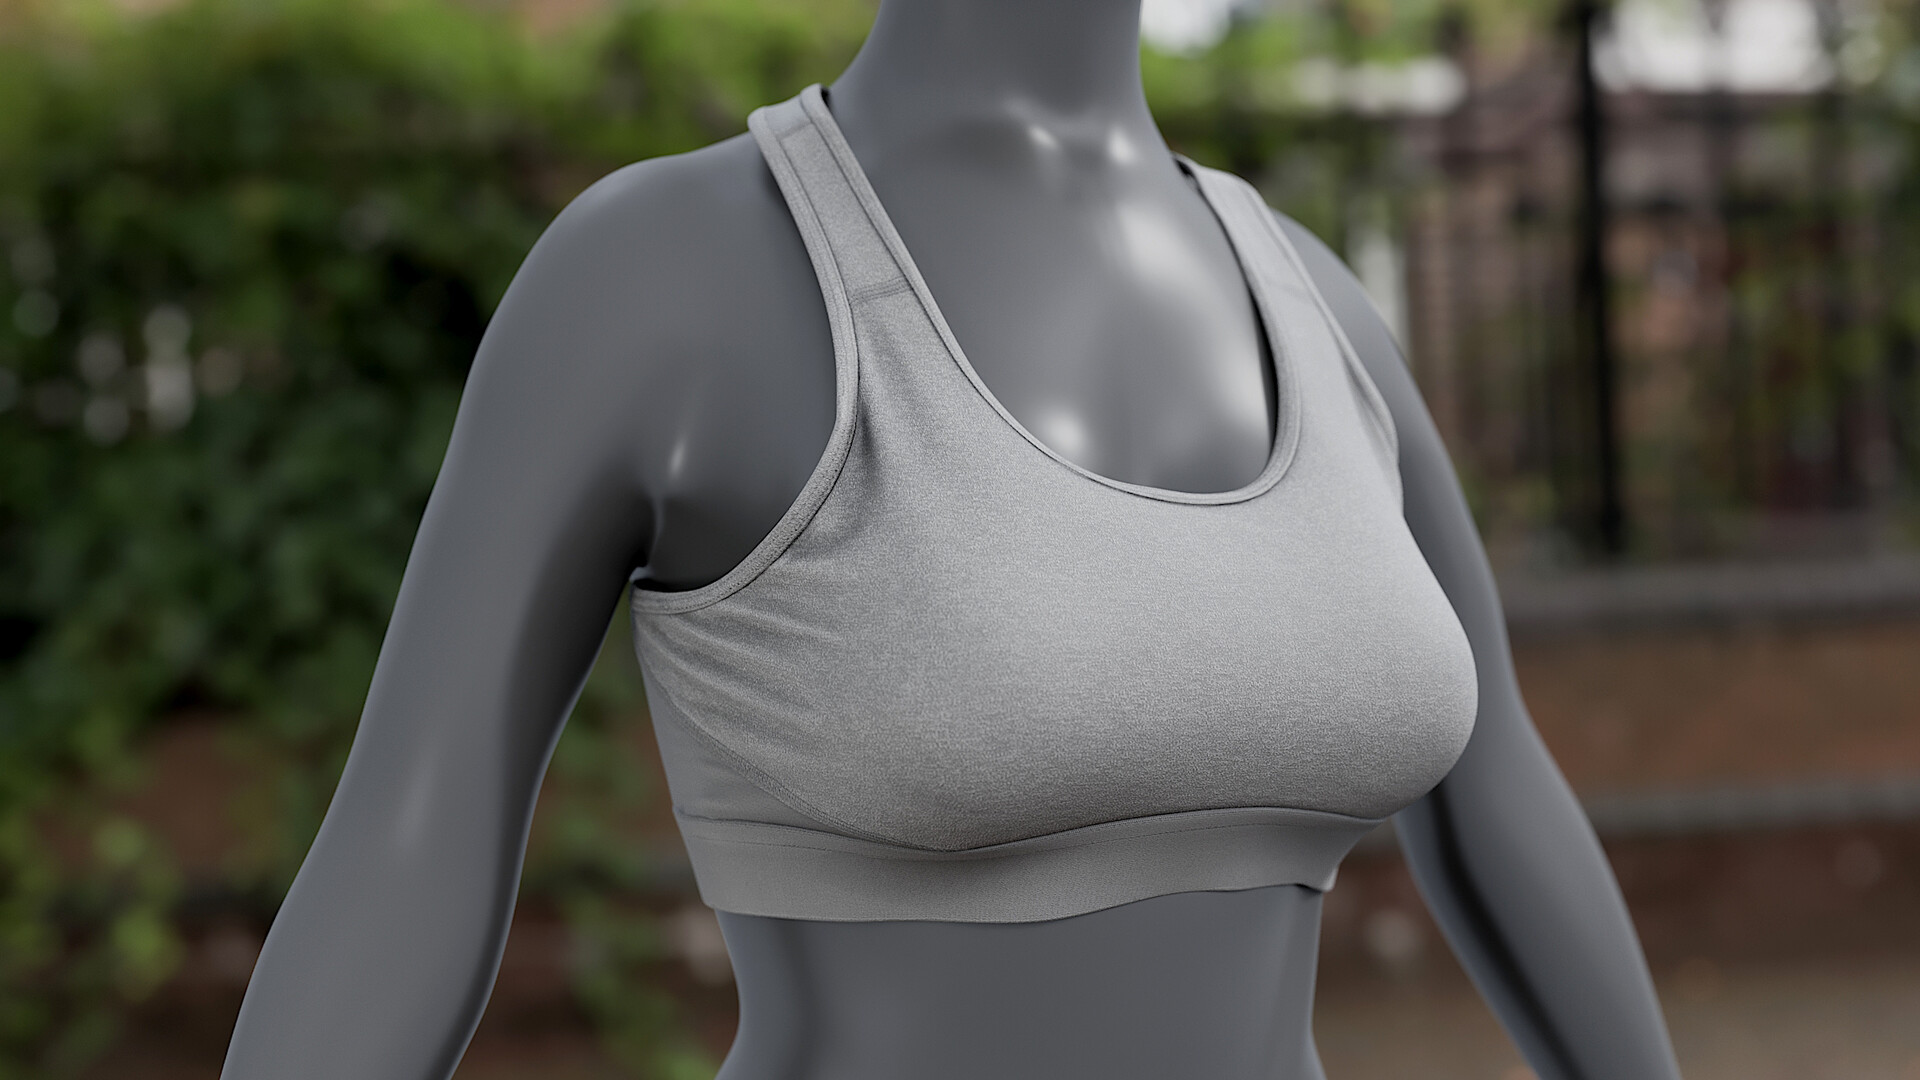 31,182 Sexy Woman Sports Bra Images, Stock Photos, 3D objects, & Vectors